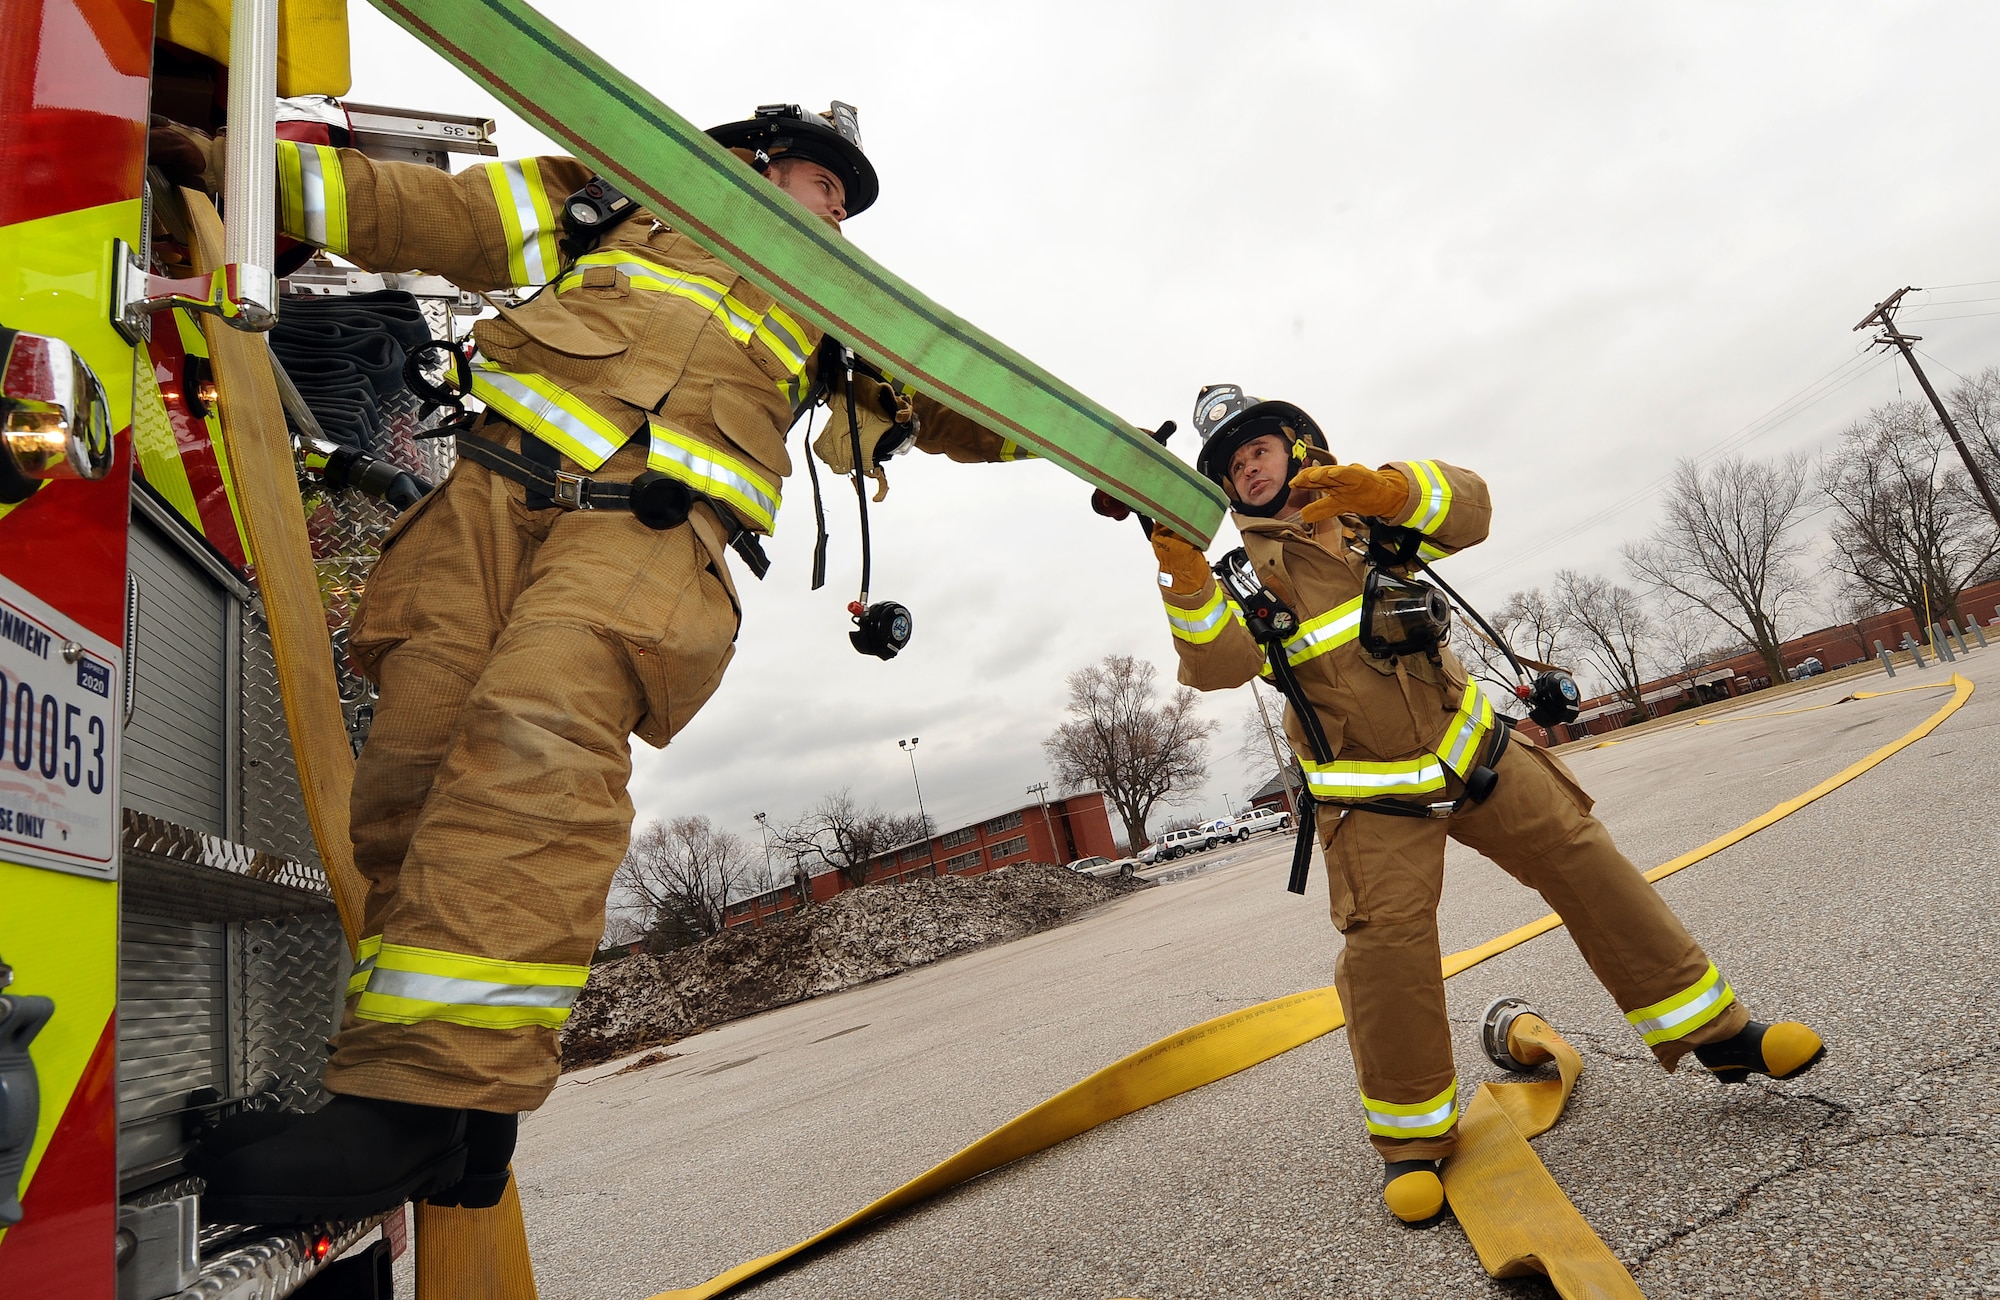 Lucas Lechtenberg, Offutt Air Force Base firefighter, unravels a hose from a fire truck as U.S. Air Force Brig. Gen. Donald Bacon, 55th Wing commander, takes the hose seconds before entering a mock fire inside of the McCoy Hall, an empty dorm building at Offutt AFB, Neb., March 7.  Bacon spent a 24-hour period with Offutt firefighters to get an up-close look into their operations and life in the firehouse.  (U.S. Air Force photo by Josh Plueger/Released).